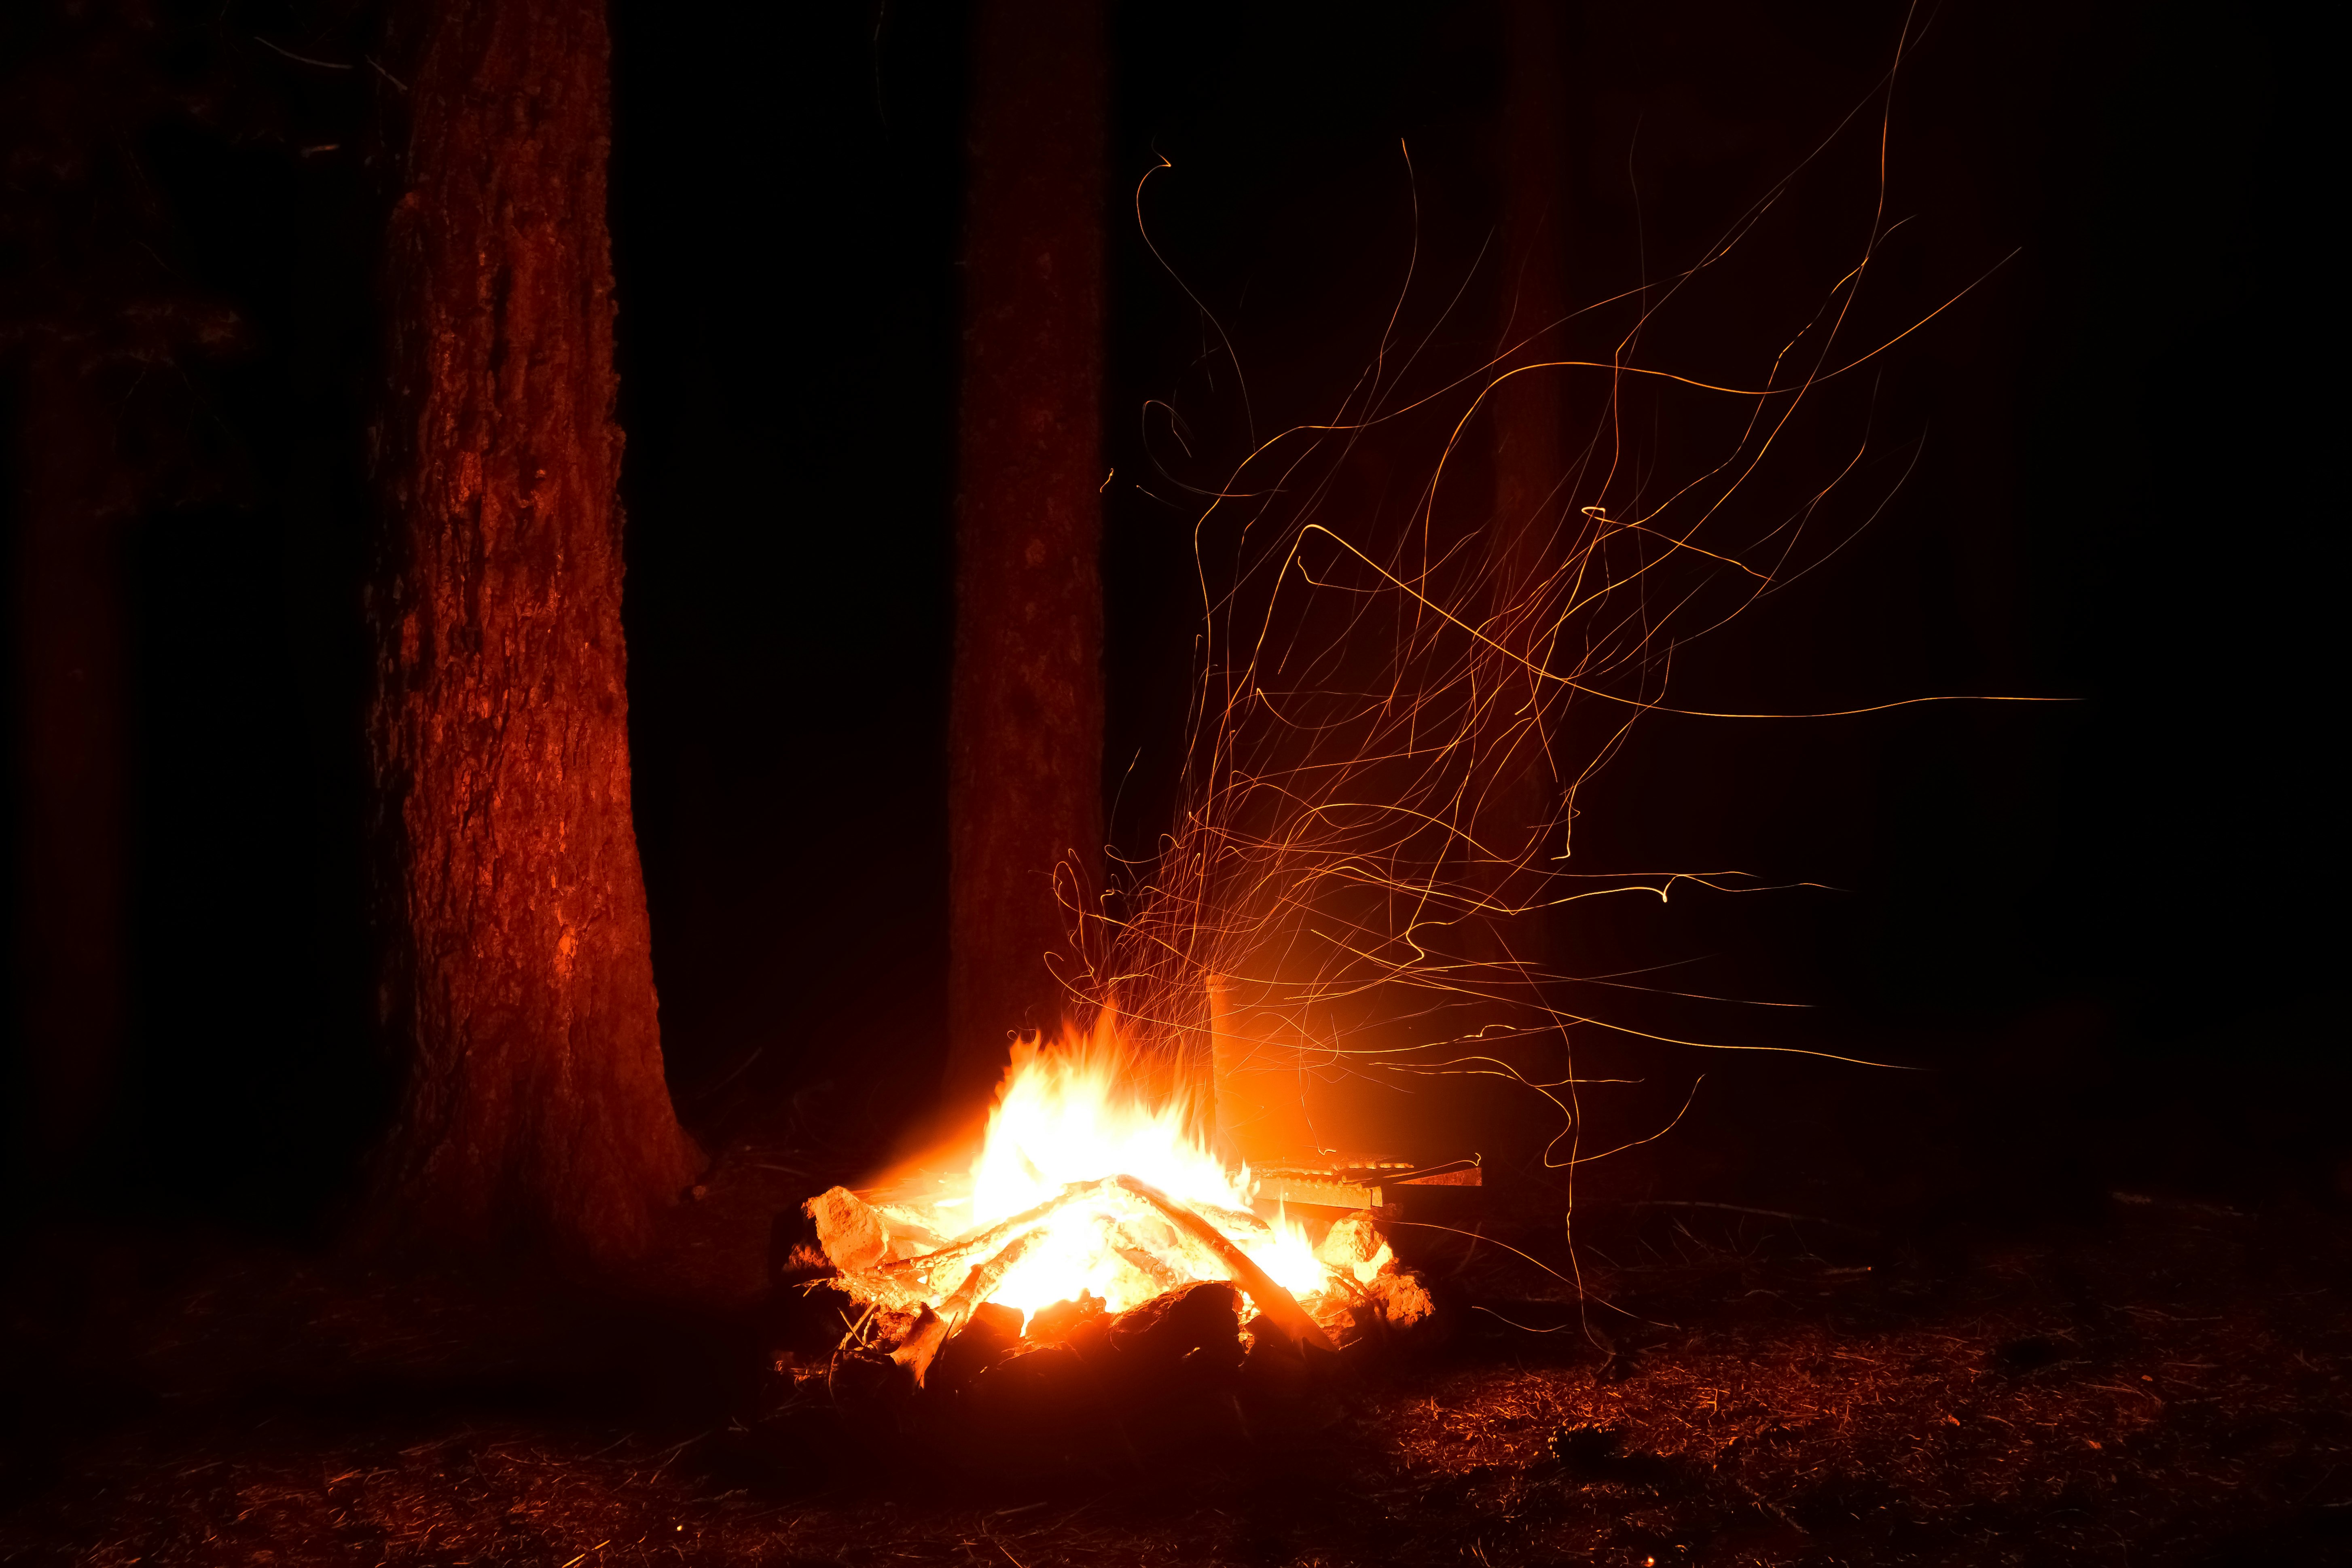 bonfire in forest during night time